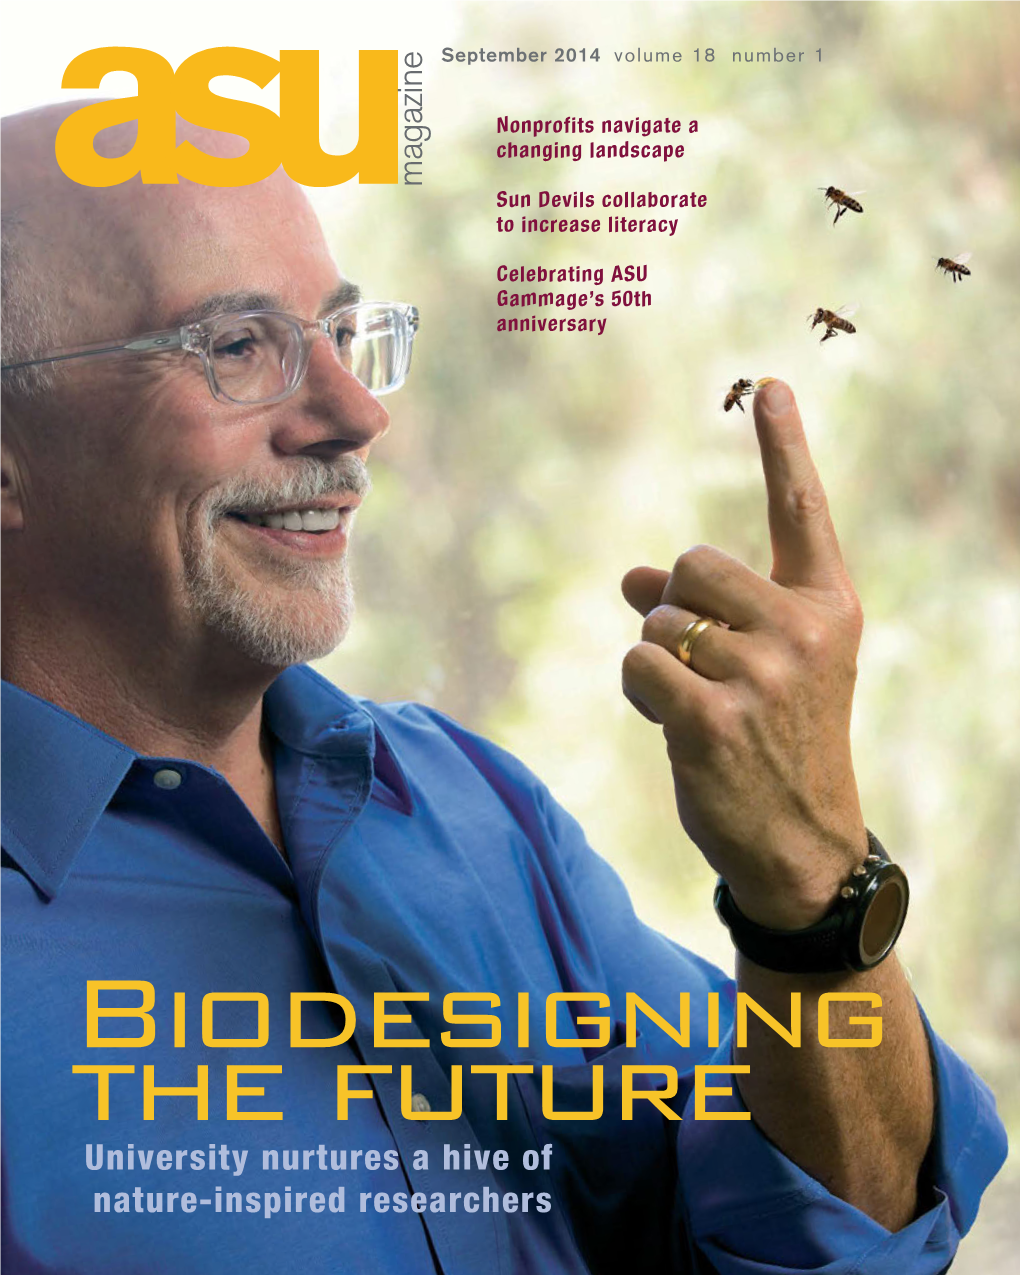 Biodesigning the Future University Nurtures a Hive of Nature-Inspired Researchers